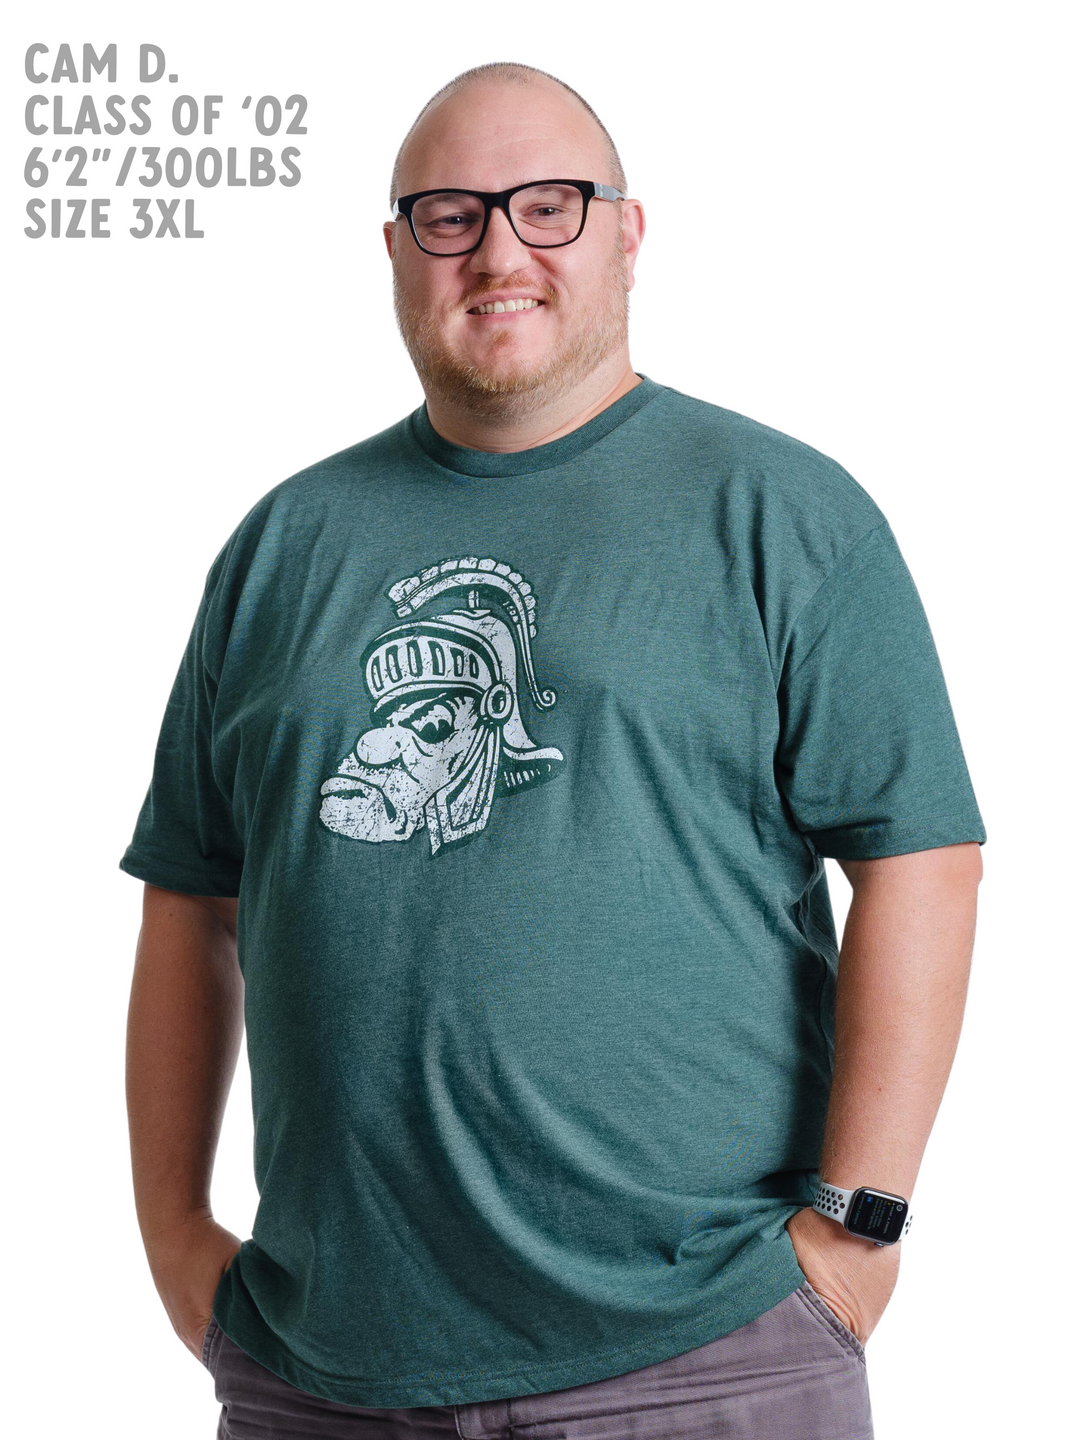 Green Gruff Sparty T Shirt in size 3XL